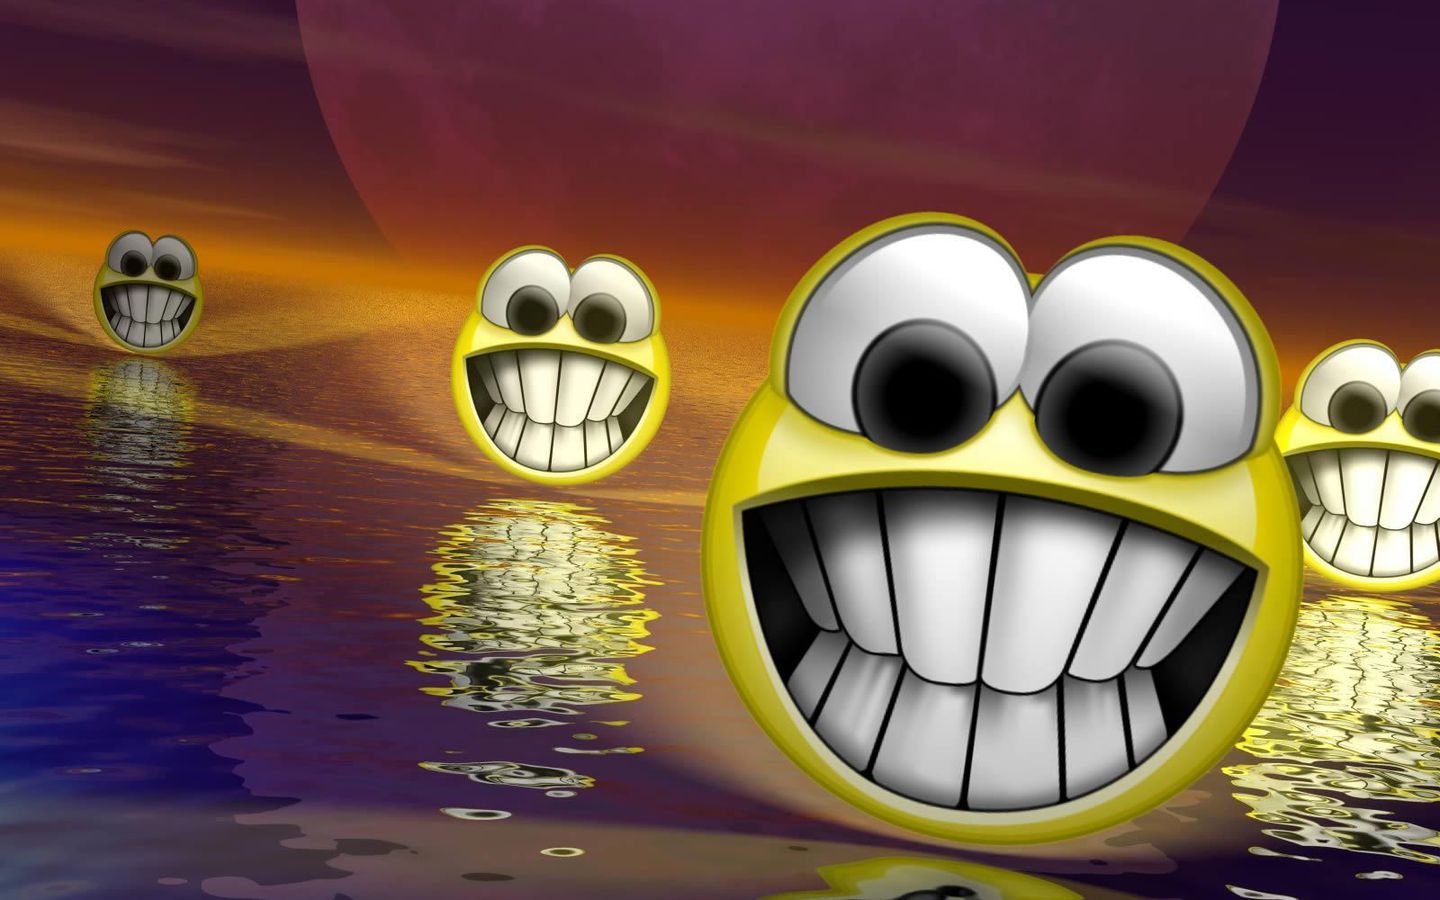 Free download Smileys Faces hd Pictures image size 1440x900 free [1440x900]  for your Desktop, Mobile & Tablet | Explore 71+ Smile Face Wallpaper |  Smile Wallpapers, Smile Wallpaper, Happy Face Wallpaper Smile